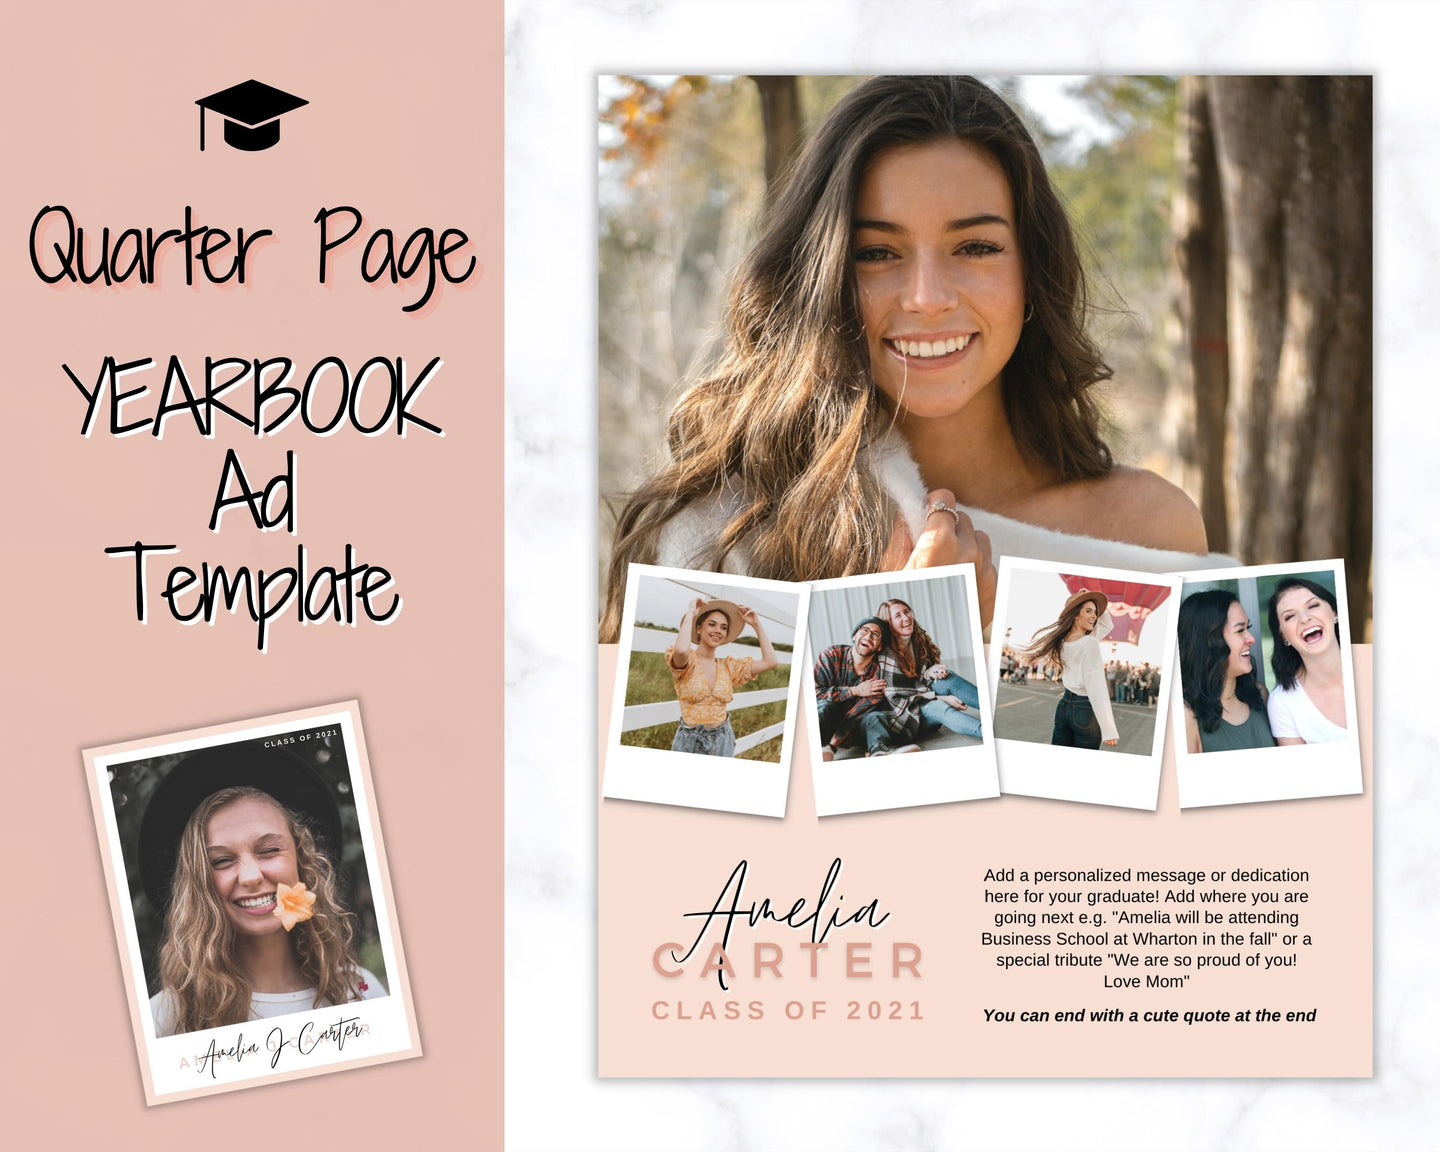 Yearbook AD Template, Senior & High School Graduation, Grad Announcement, School Yearbook, QUARTER Page, Photo Card, Yearbook Ad, Tribute | Post Horizontal